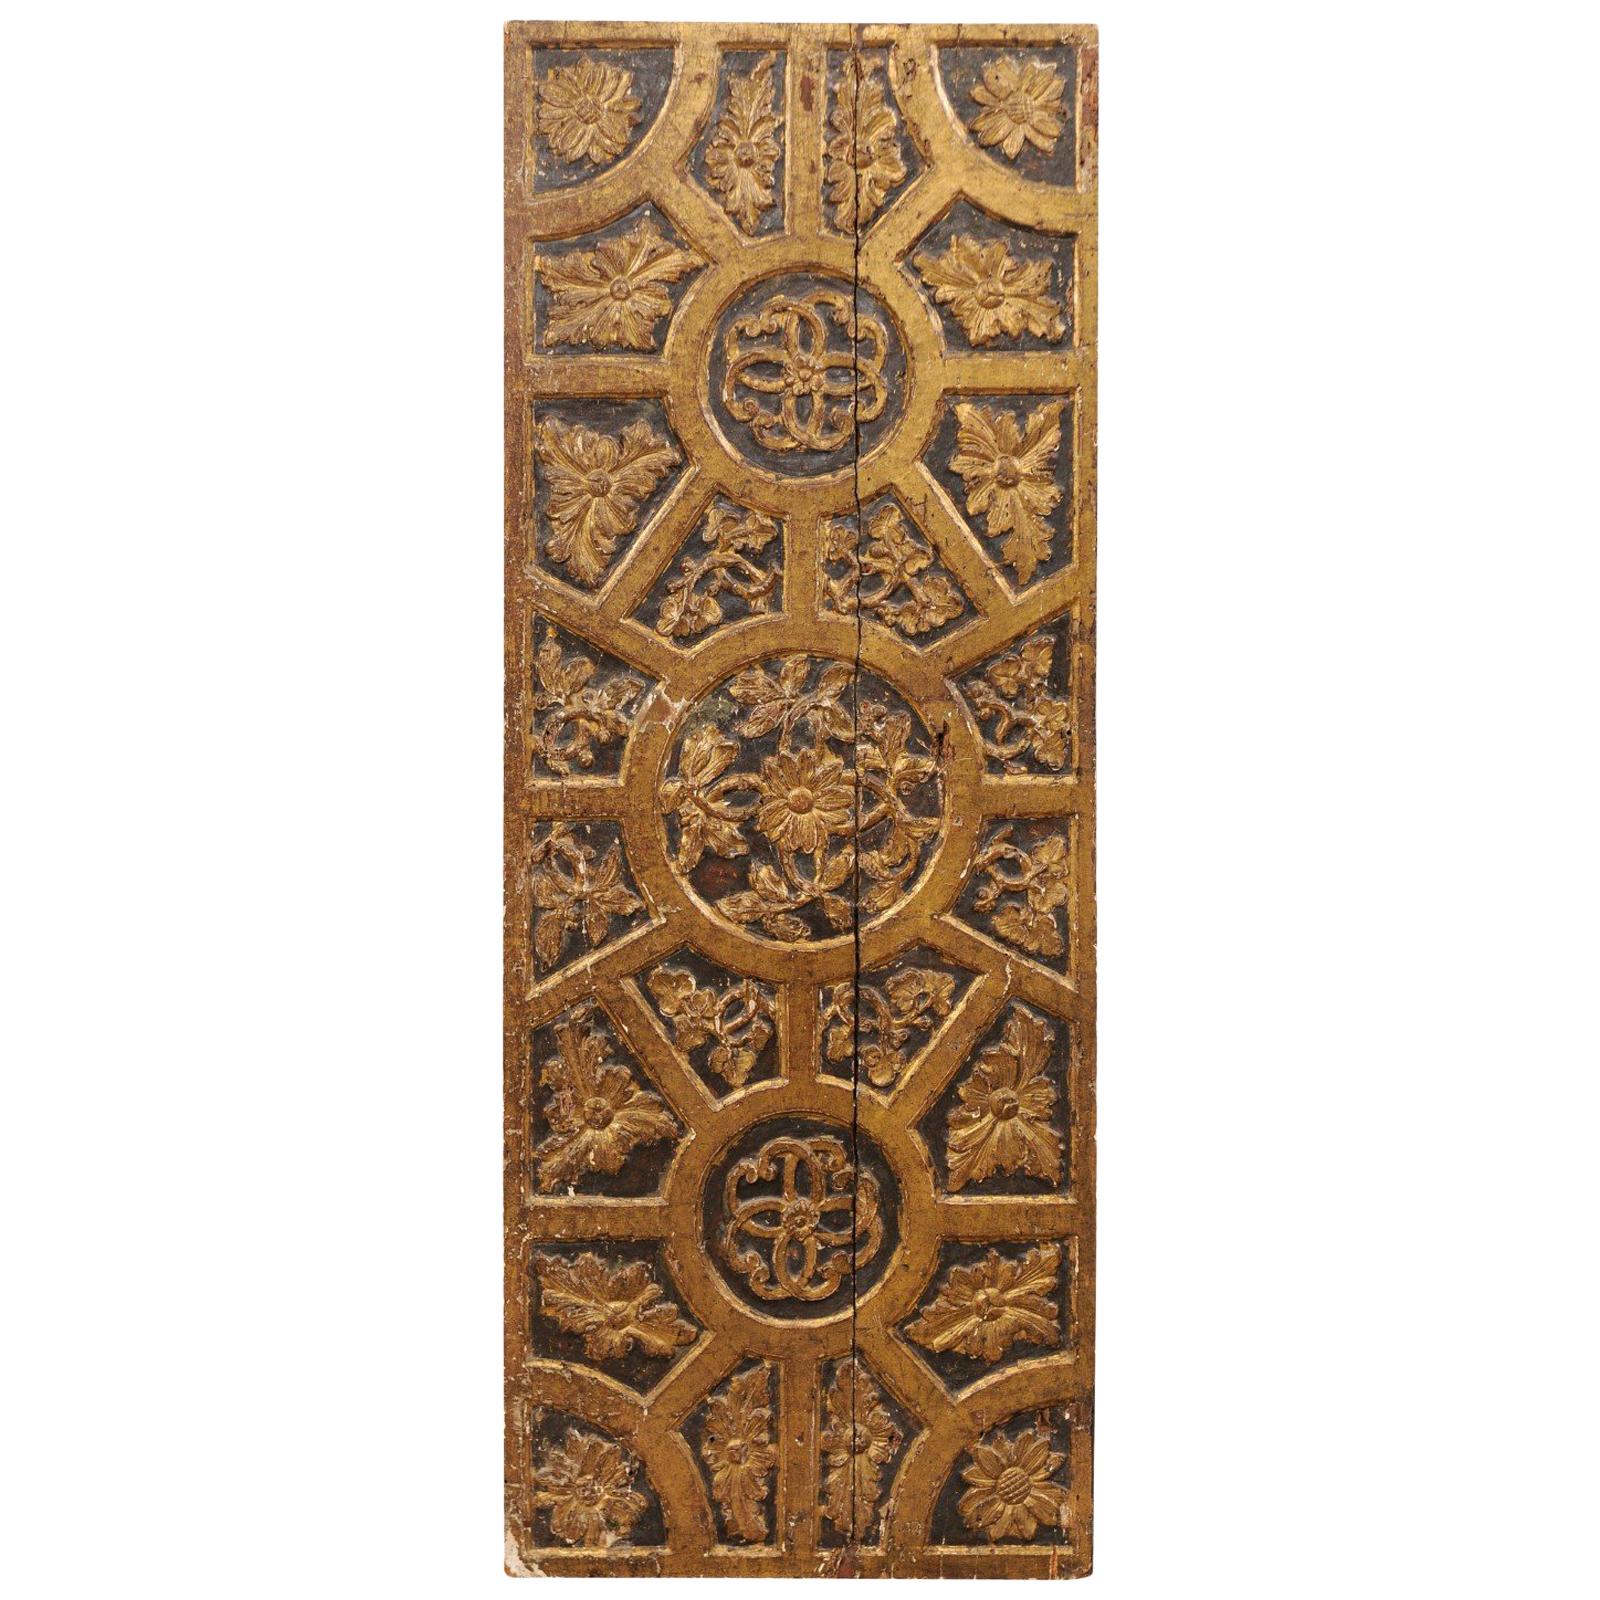 18th Century Italian Gilt and Carved Wood Panel